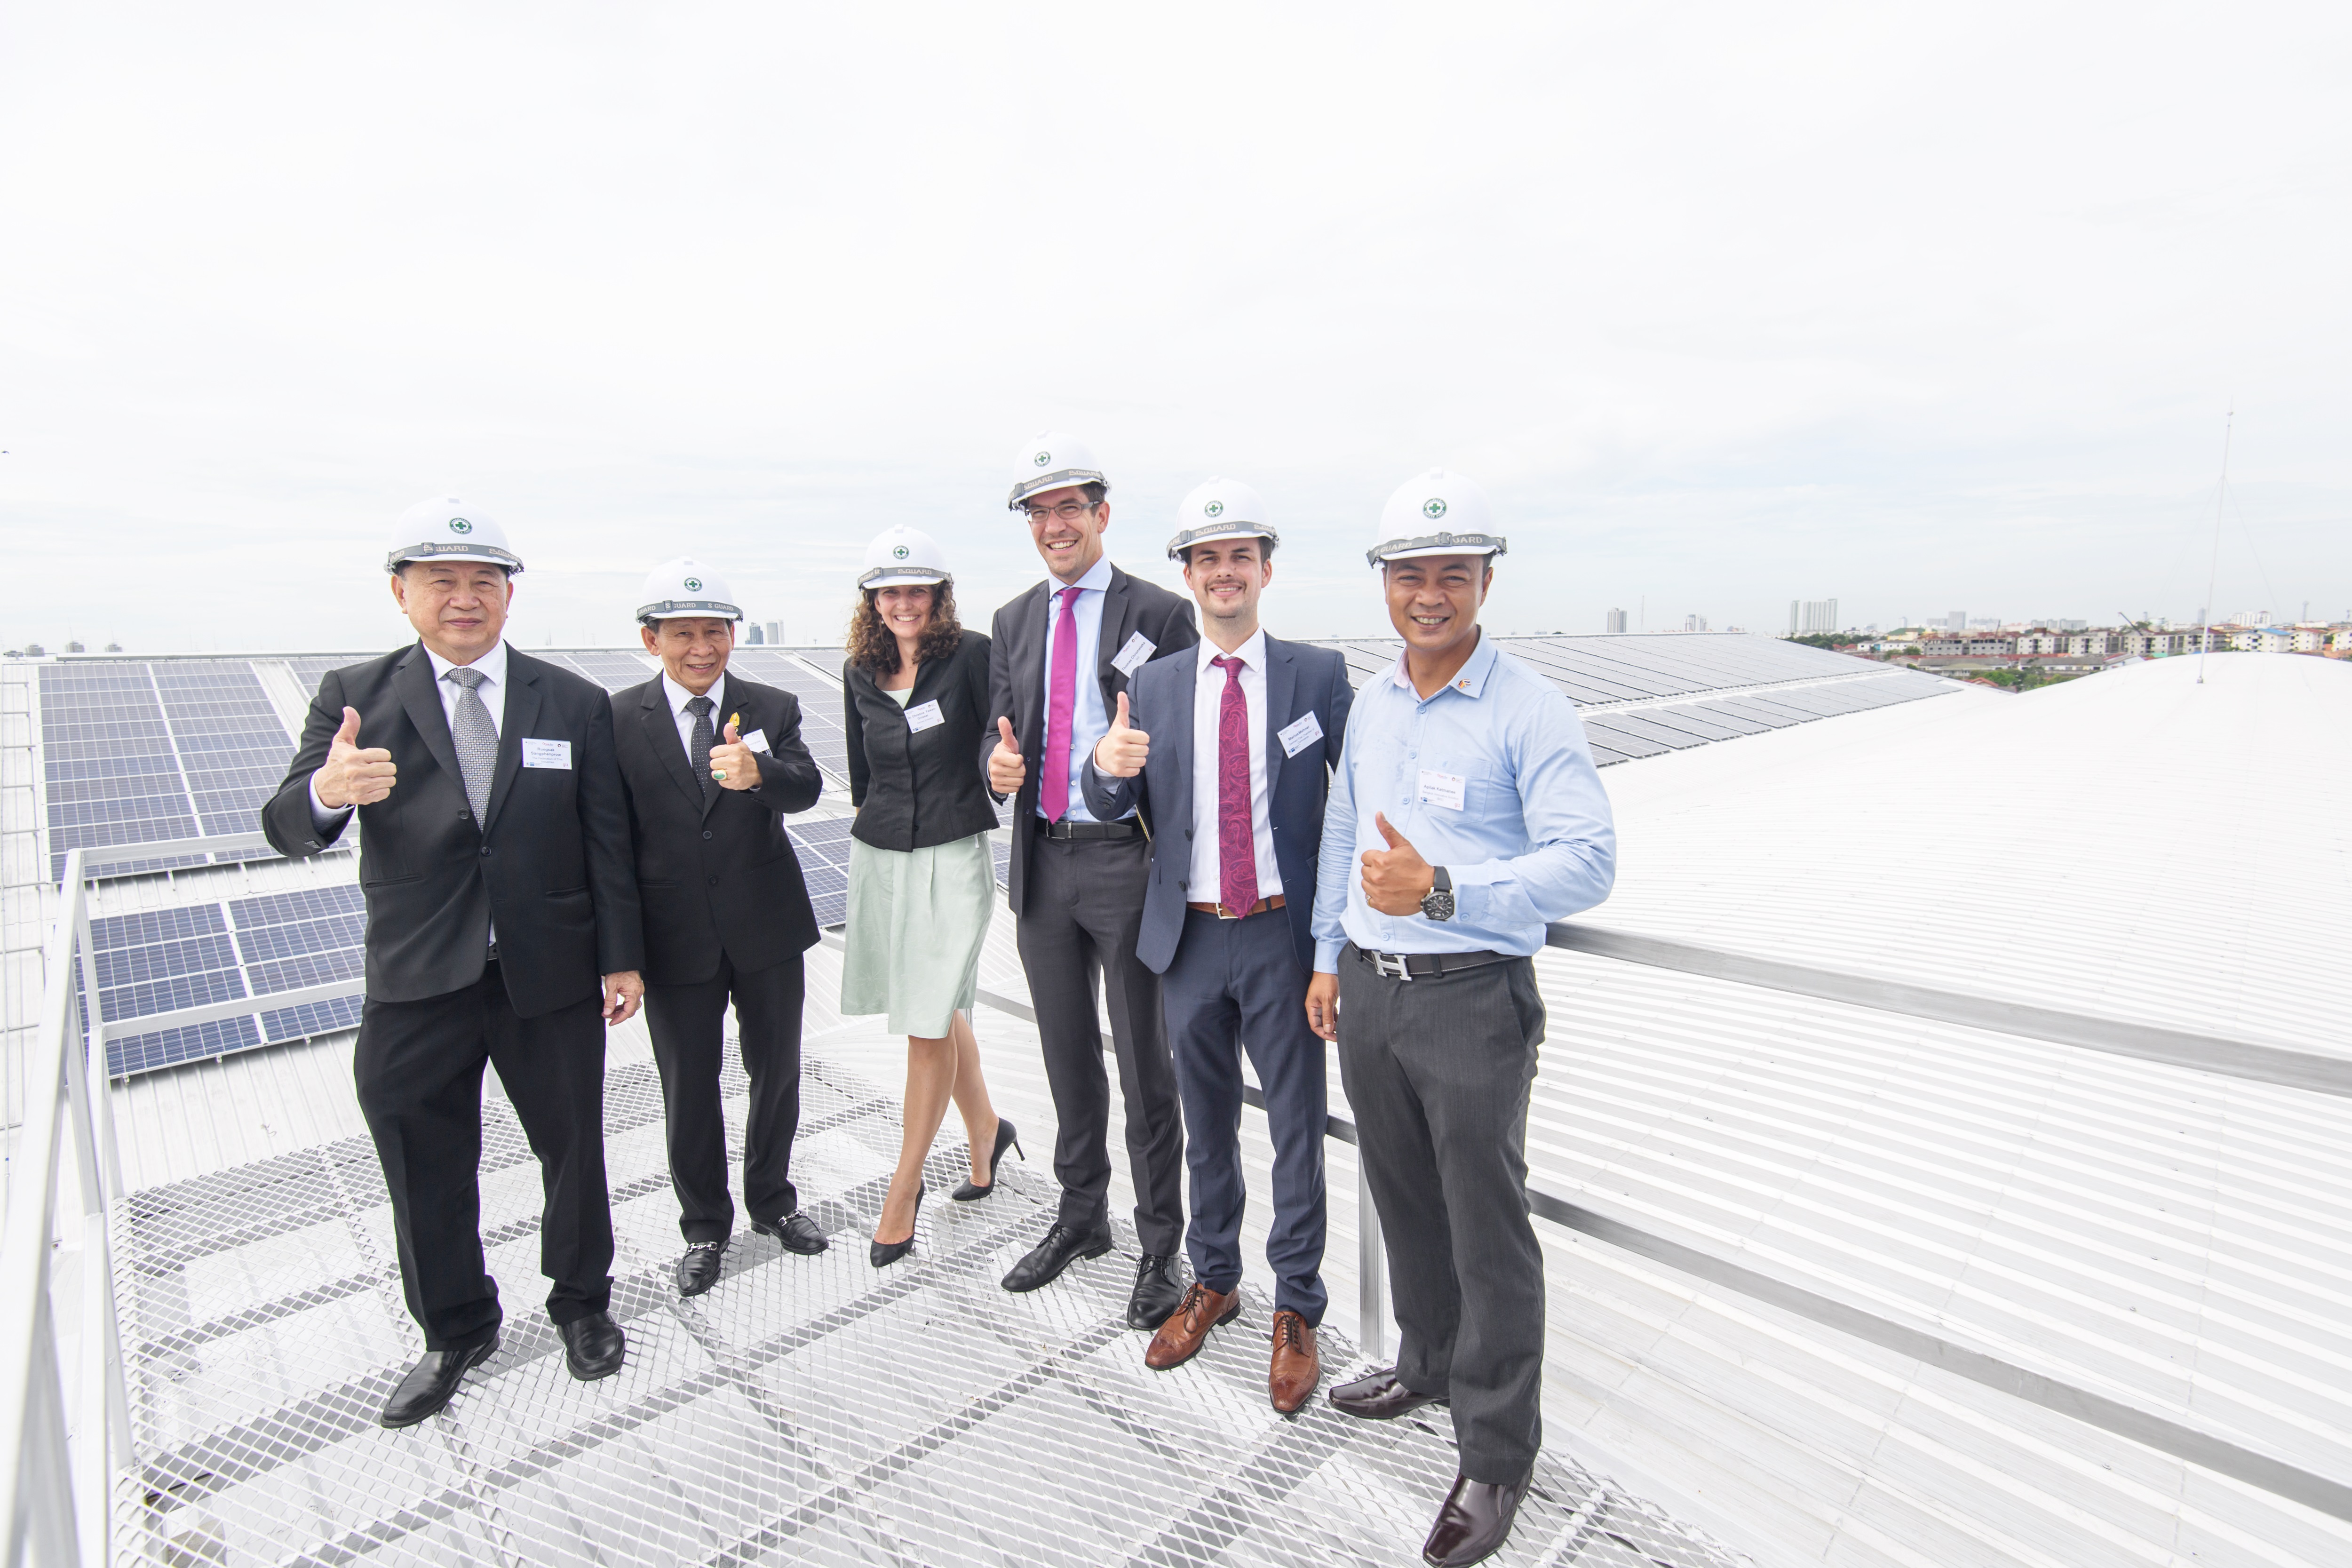 Thailand’s businesses go for the sun - Solar energy is competitive!